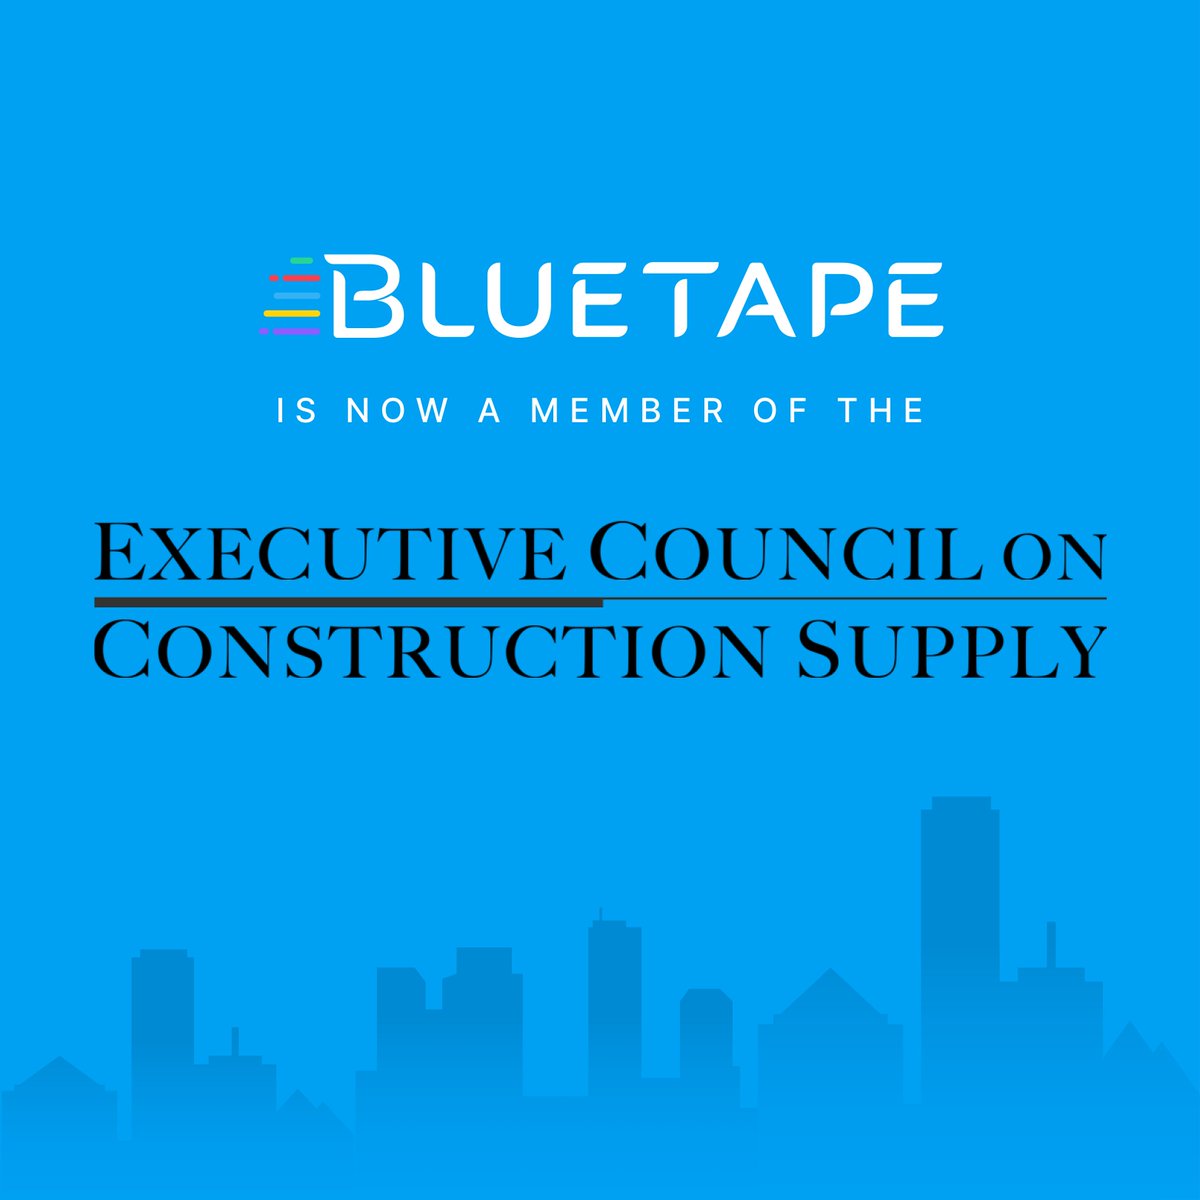 We are thrilled to announce that BlueTape has become a member of the Executive Council on Construction Supply. We take great pride in being part of this esteemed organization, dedicated to driving innovation and excellence in the #construction industry. #ConstructionSupply #LBM